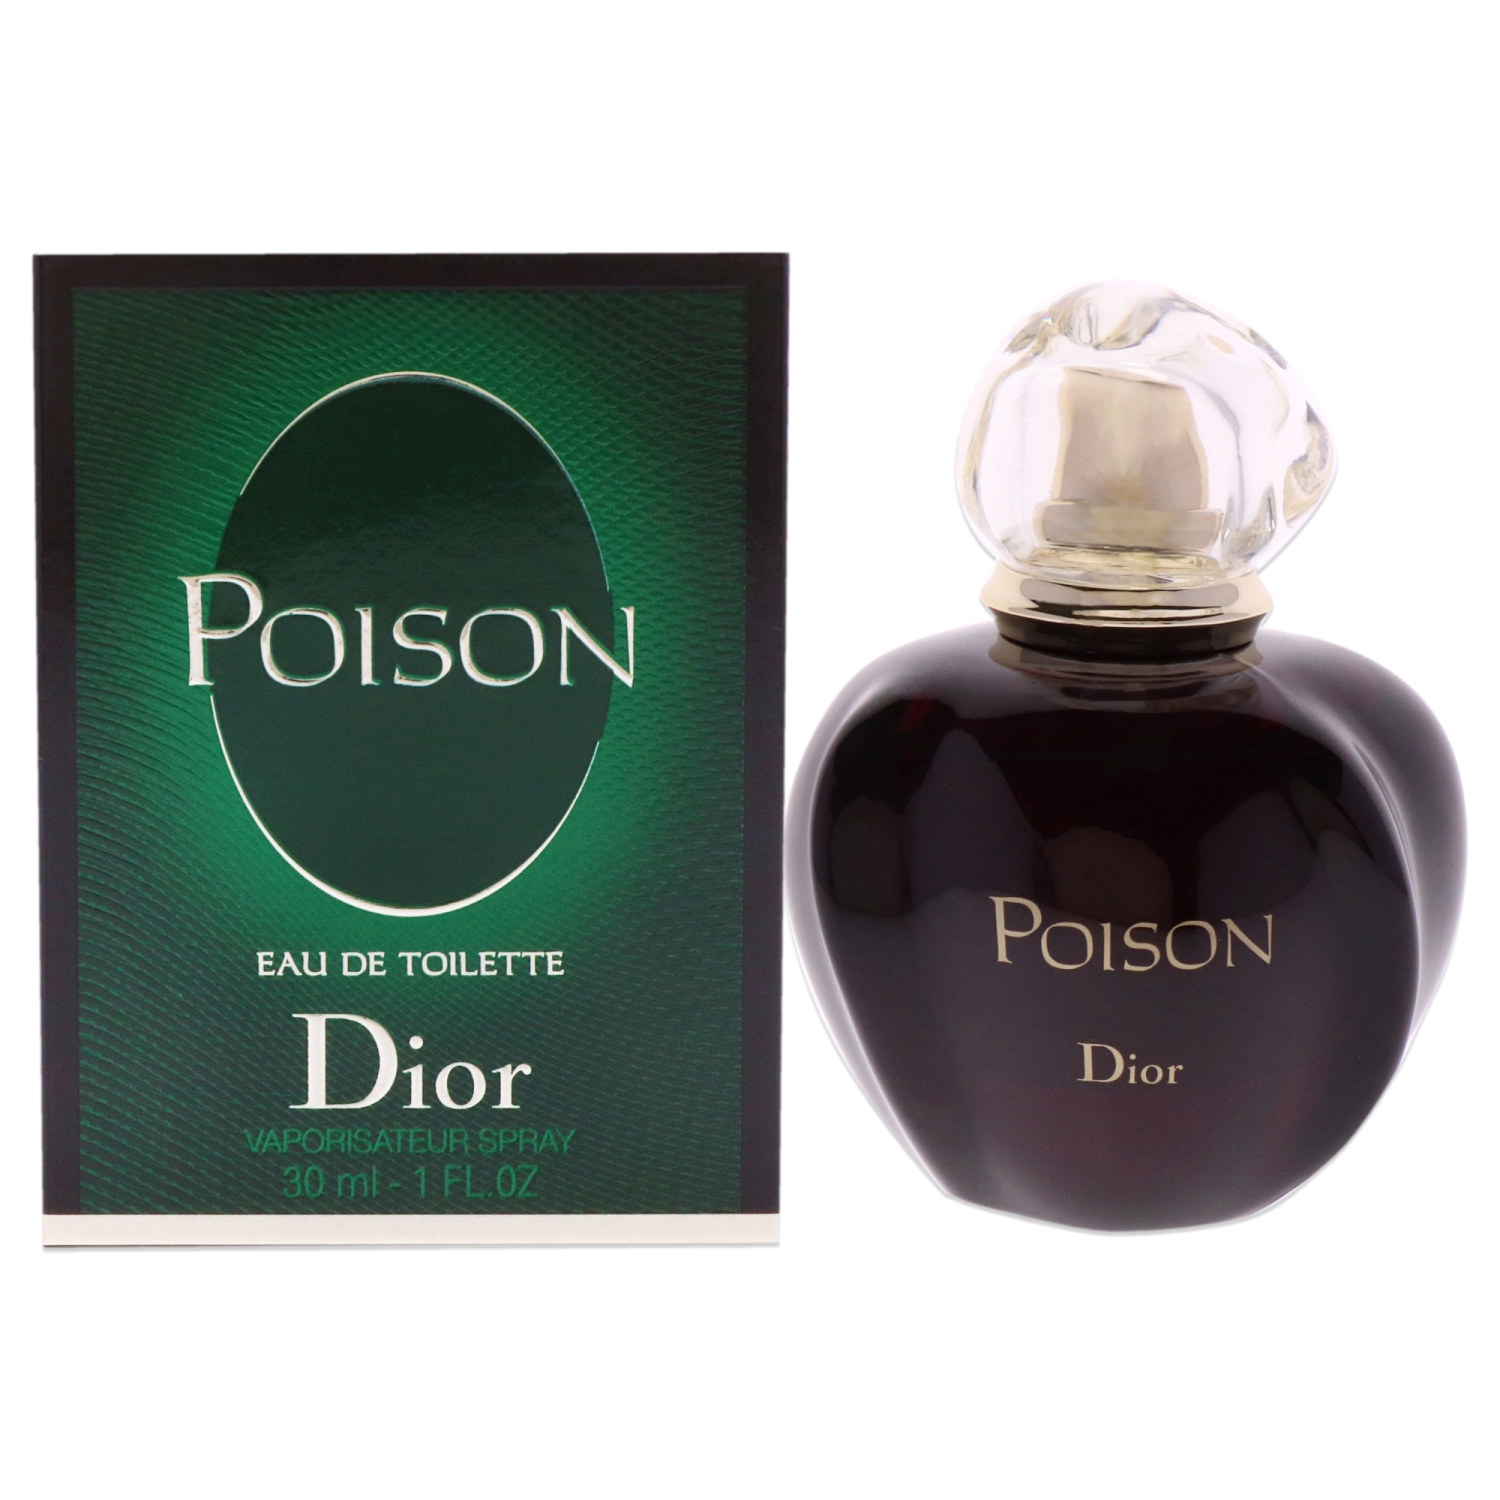 Poison by Christian Dior for Women - 1 oz EDT Spray